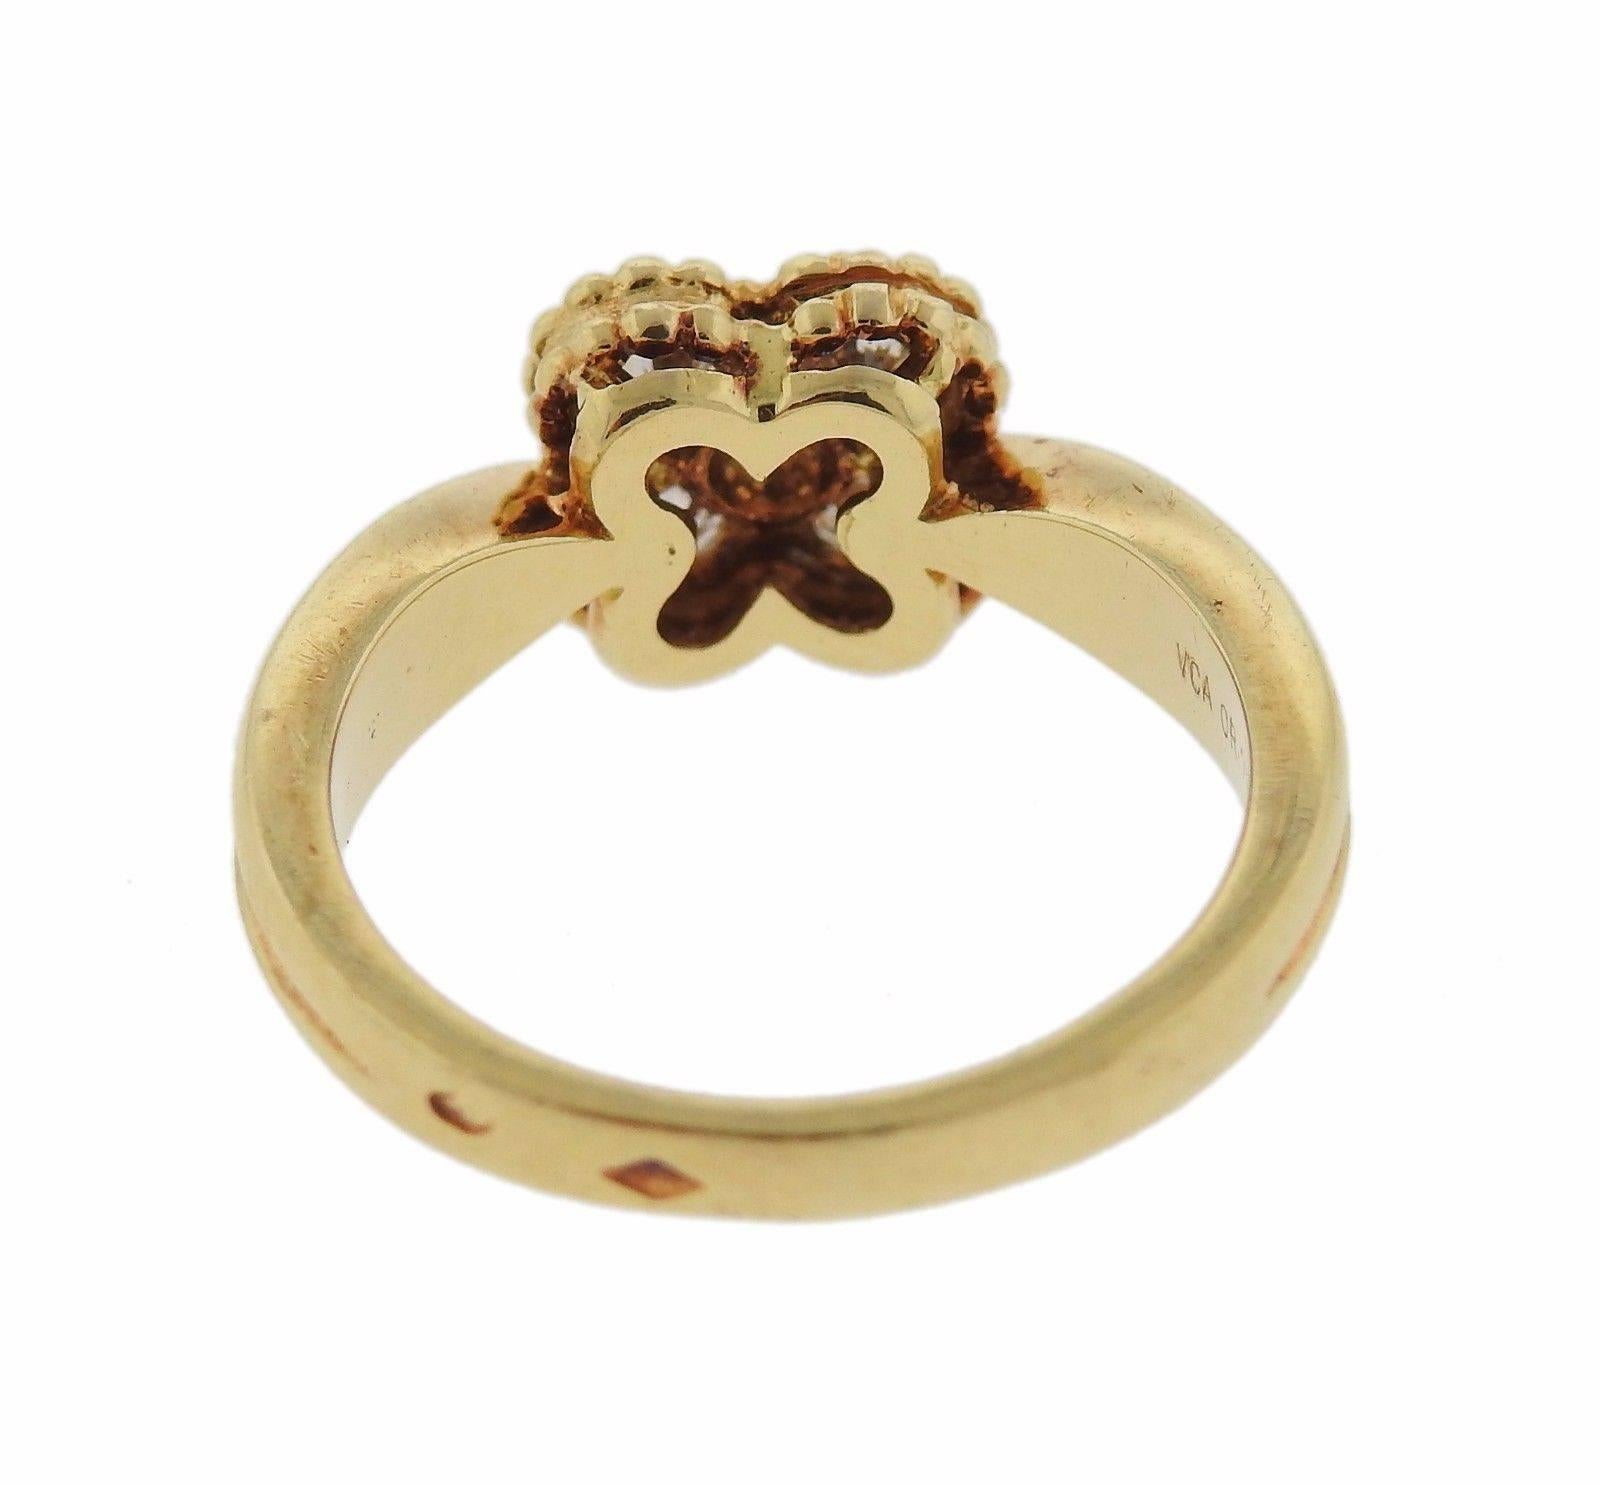 An 18k gold ring set with 0.24ctw of F-G/VVS diamonds.  The ring is a size 5 and the clover measures 8.1mm x 8.2mm.  The weight of the ring is 4.5 grams.  Marked: VCA, OR 750, B5960, A102.